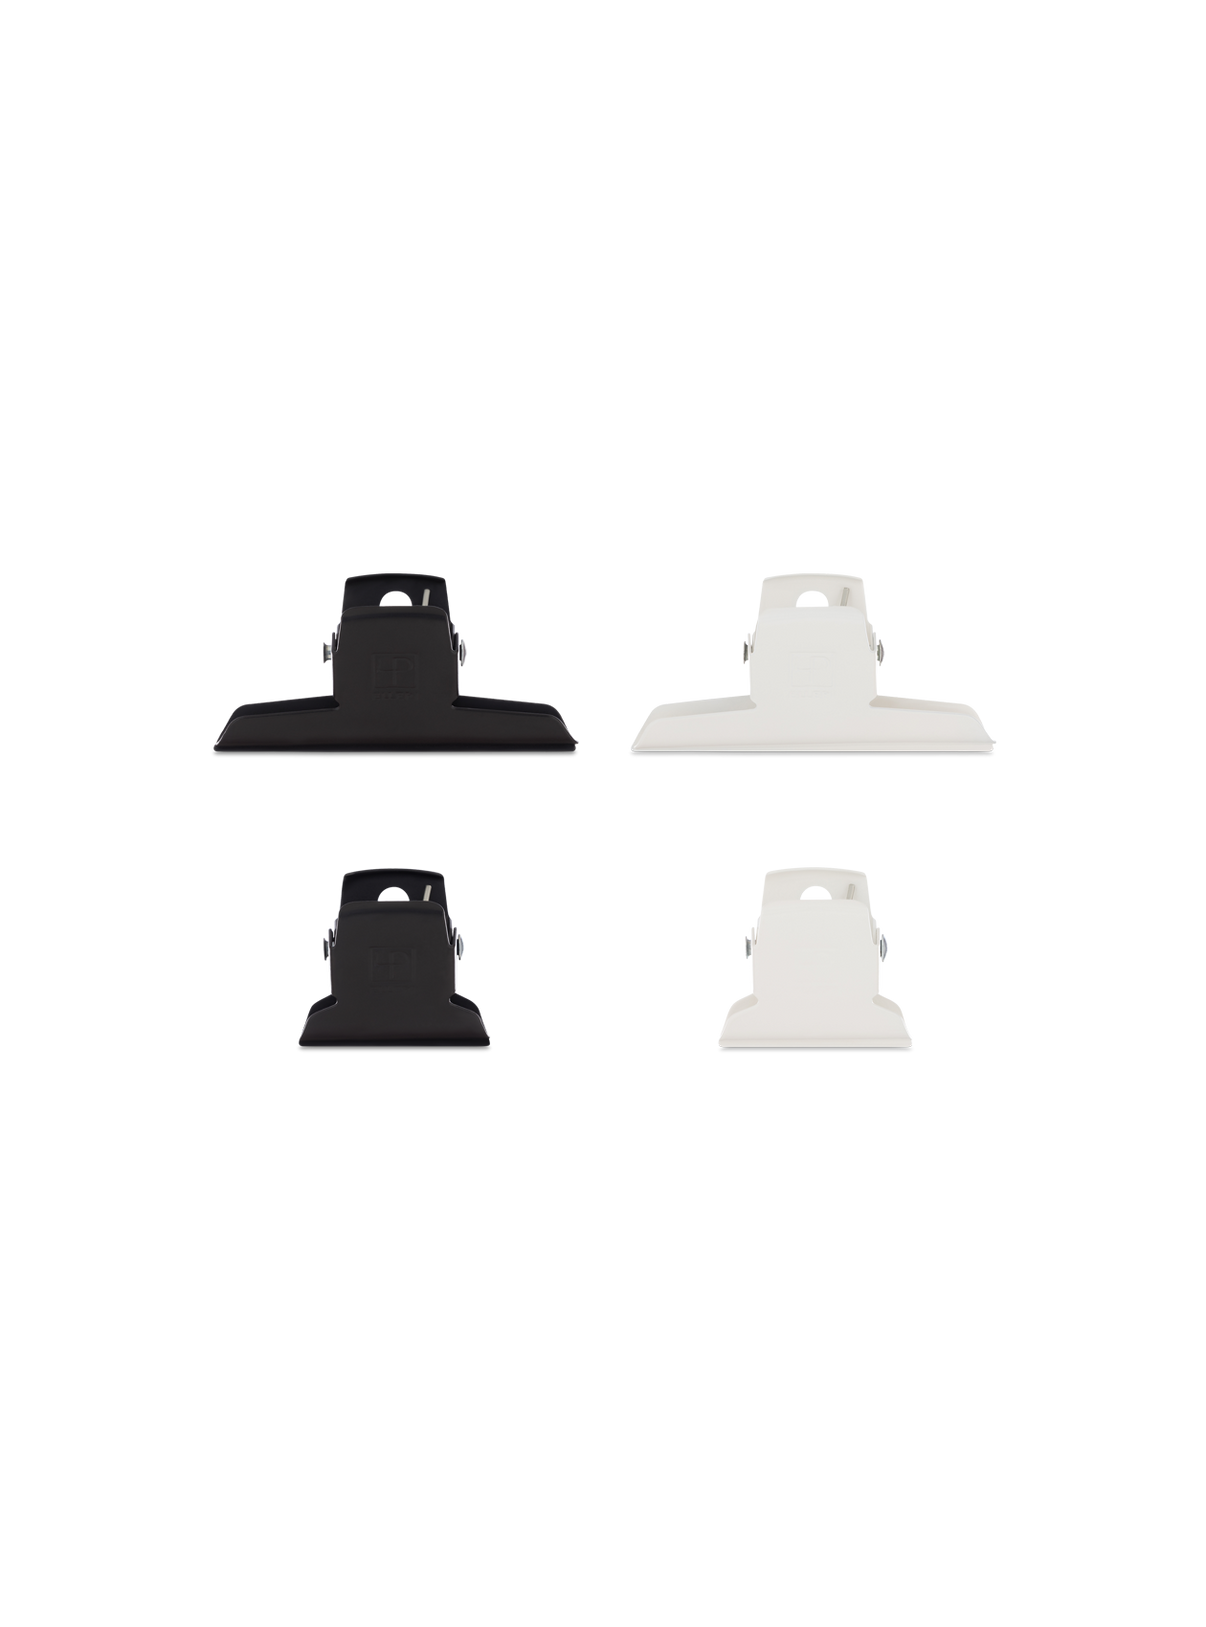 Metal Clips in two colors, black and white, and two sizes, 2